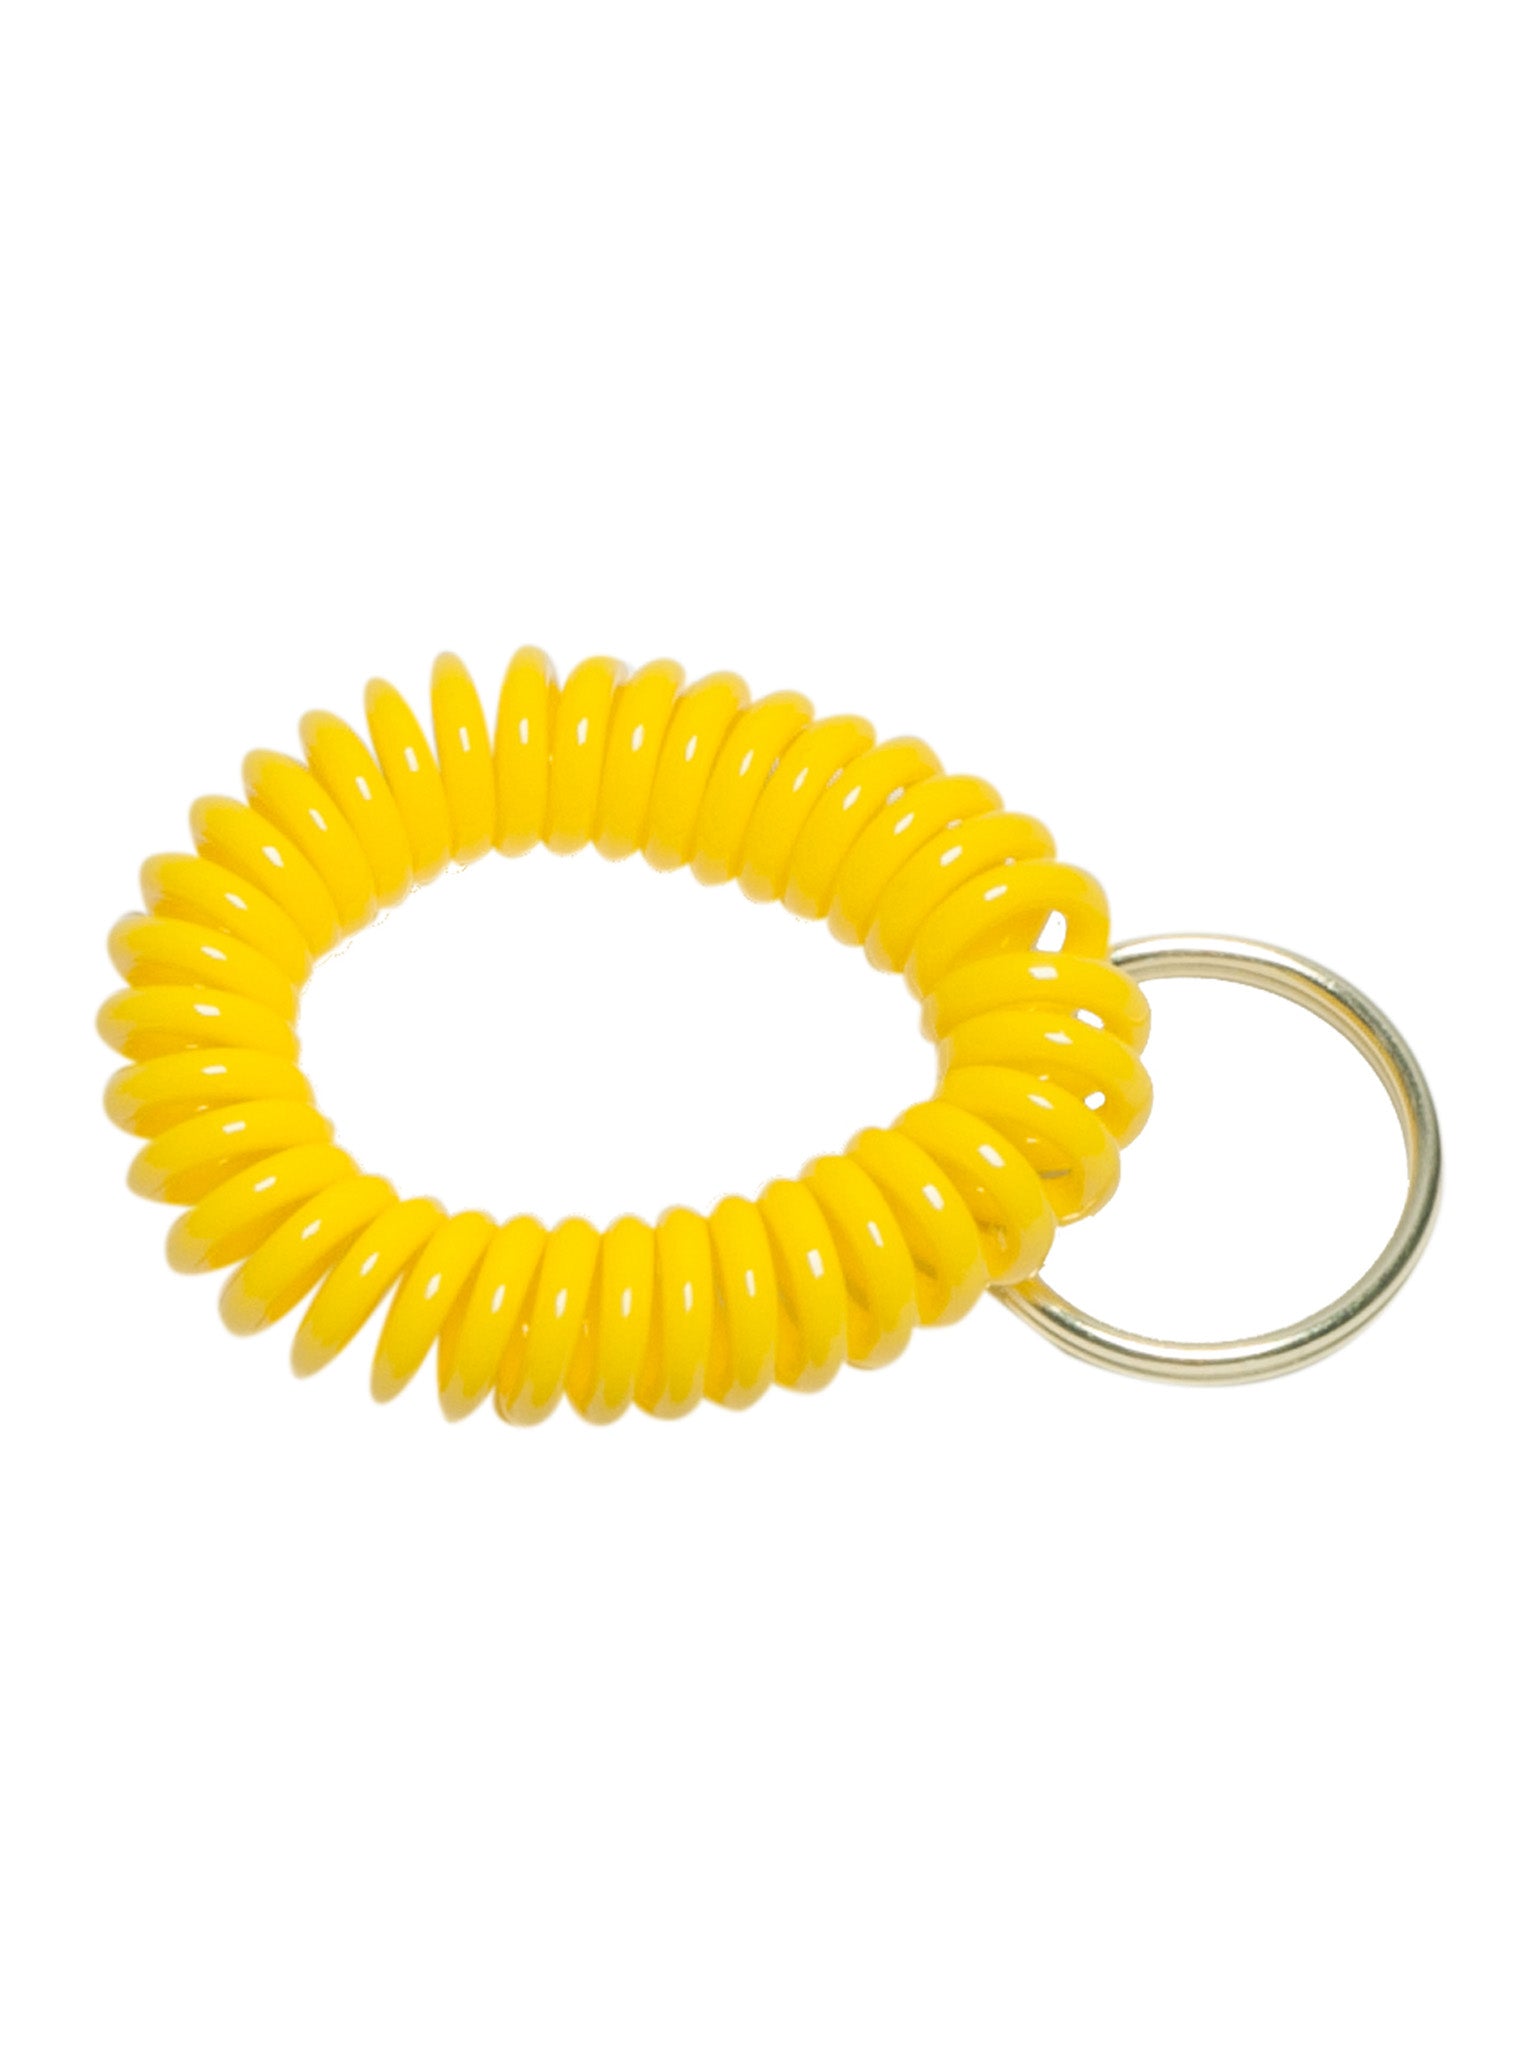 Spiral Bracelets For Whistle - Yellow